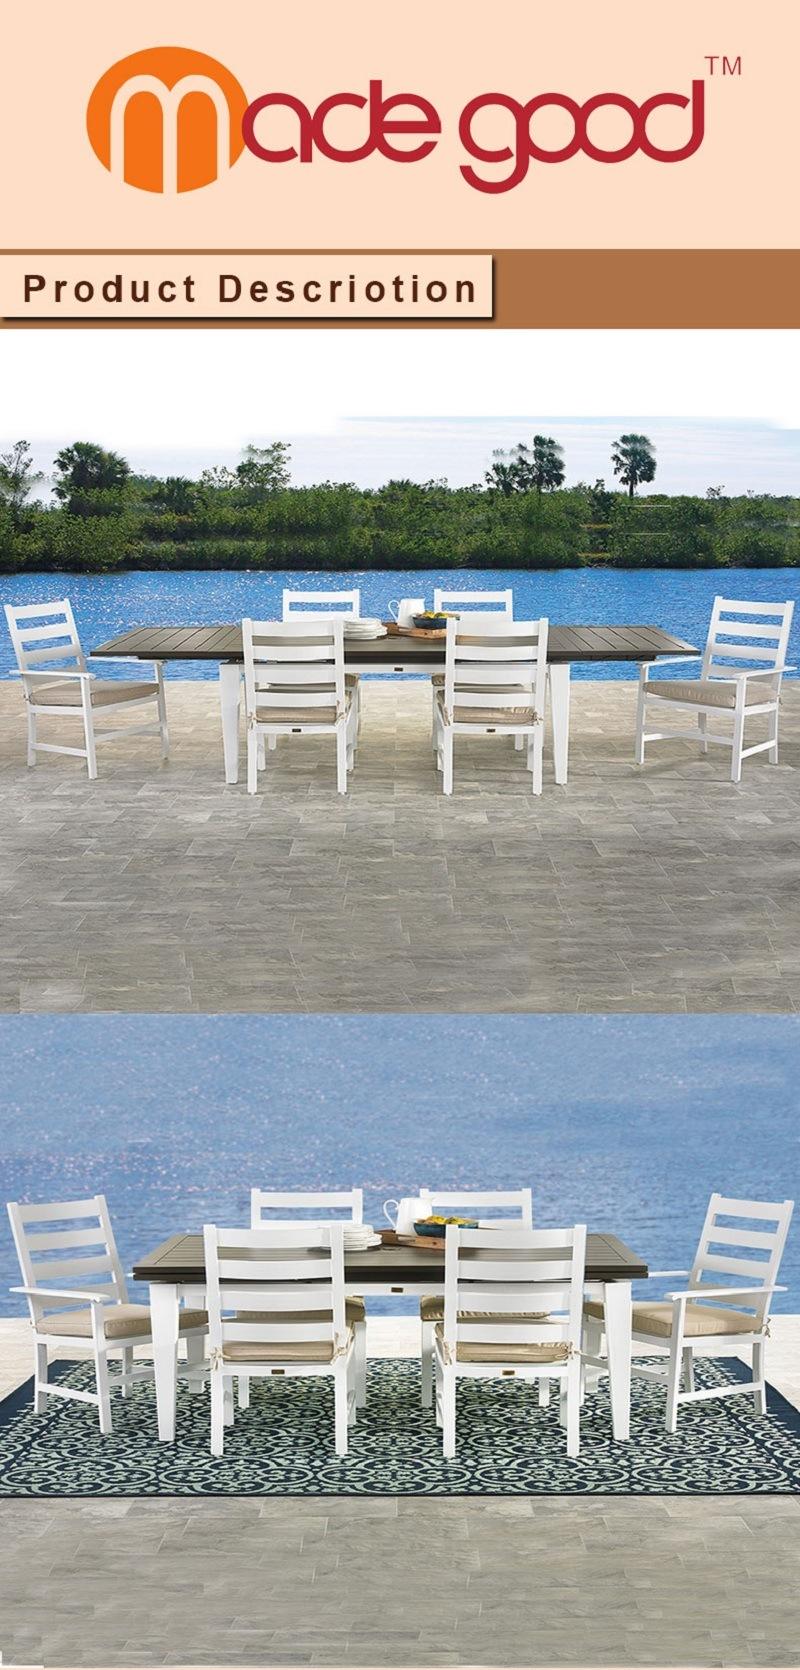 Outdoor Rectangular Stretch Dining Table with 6-10 Chairs